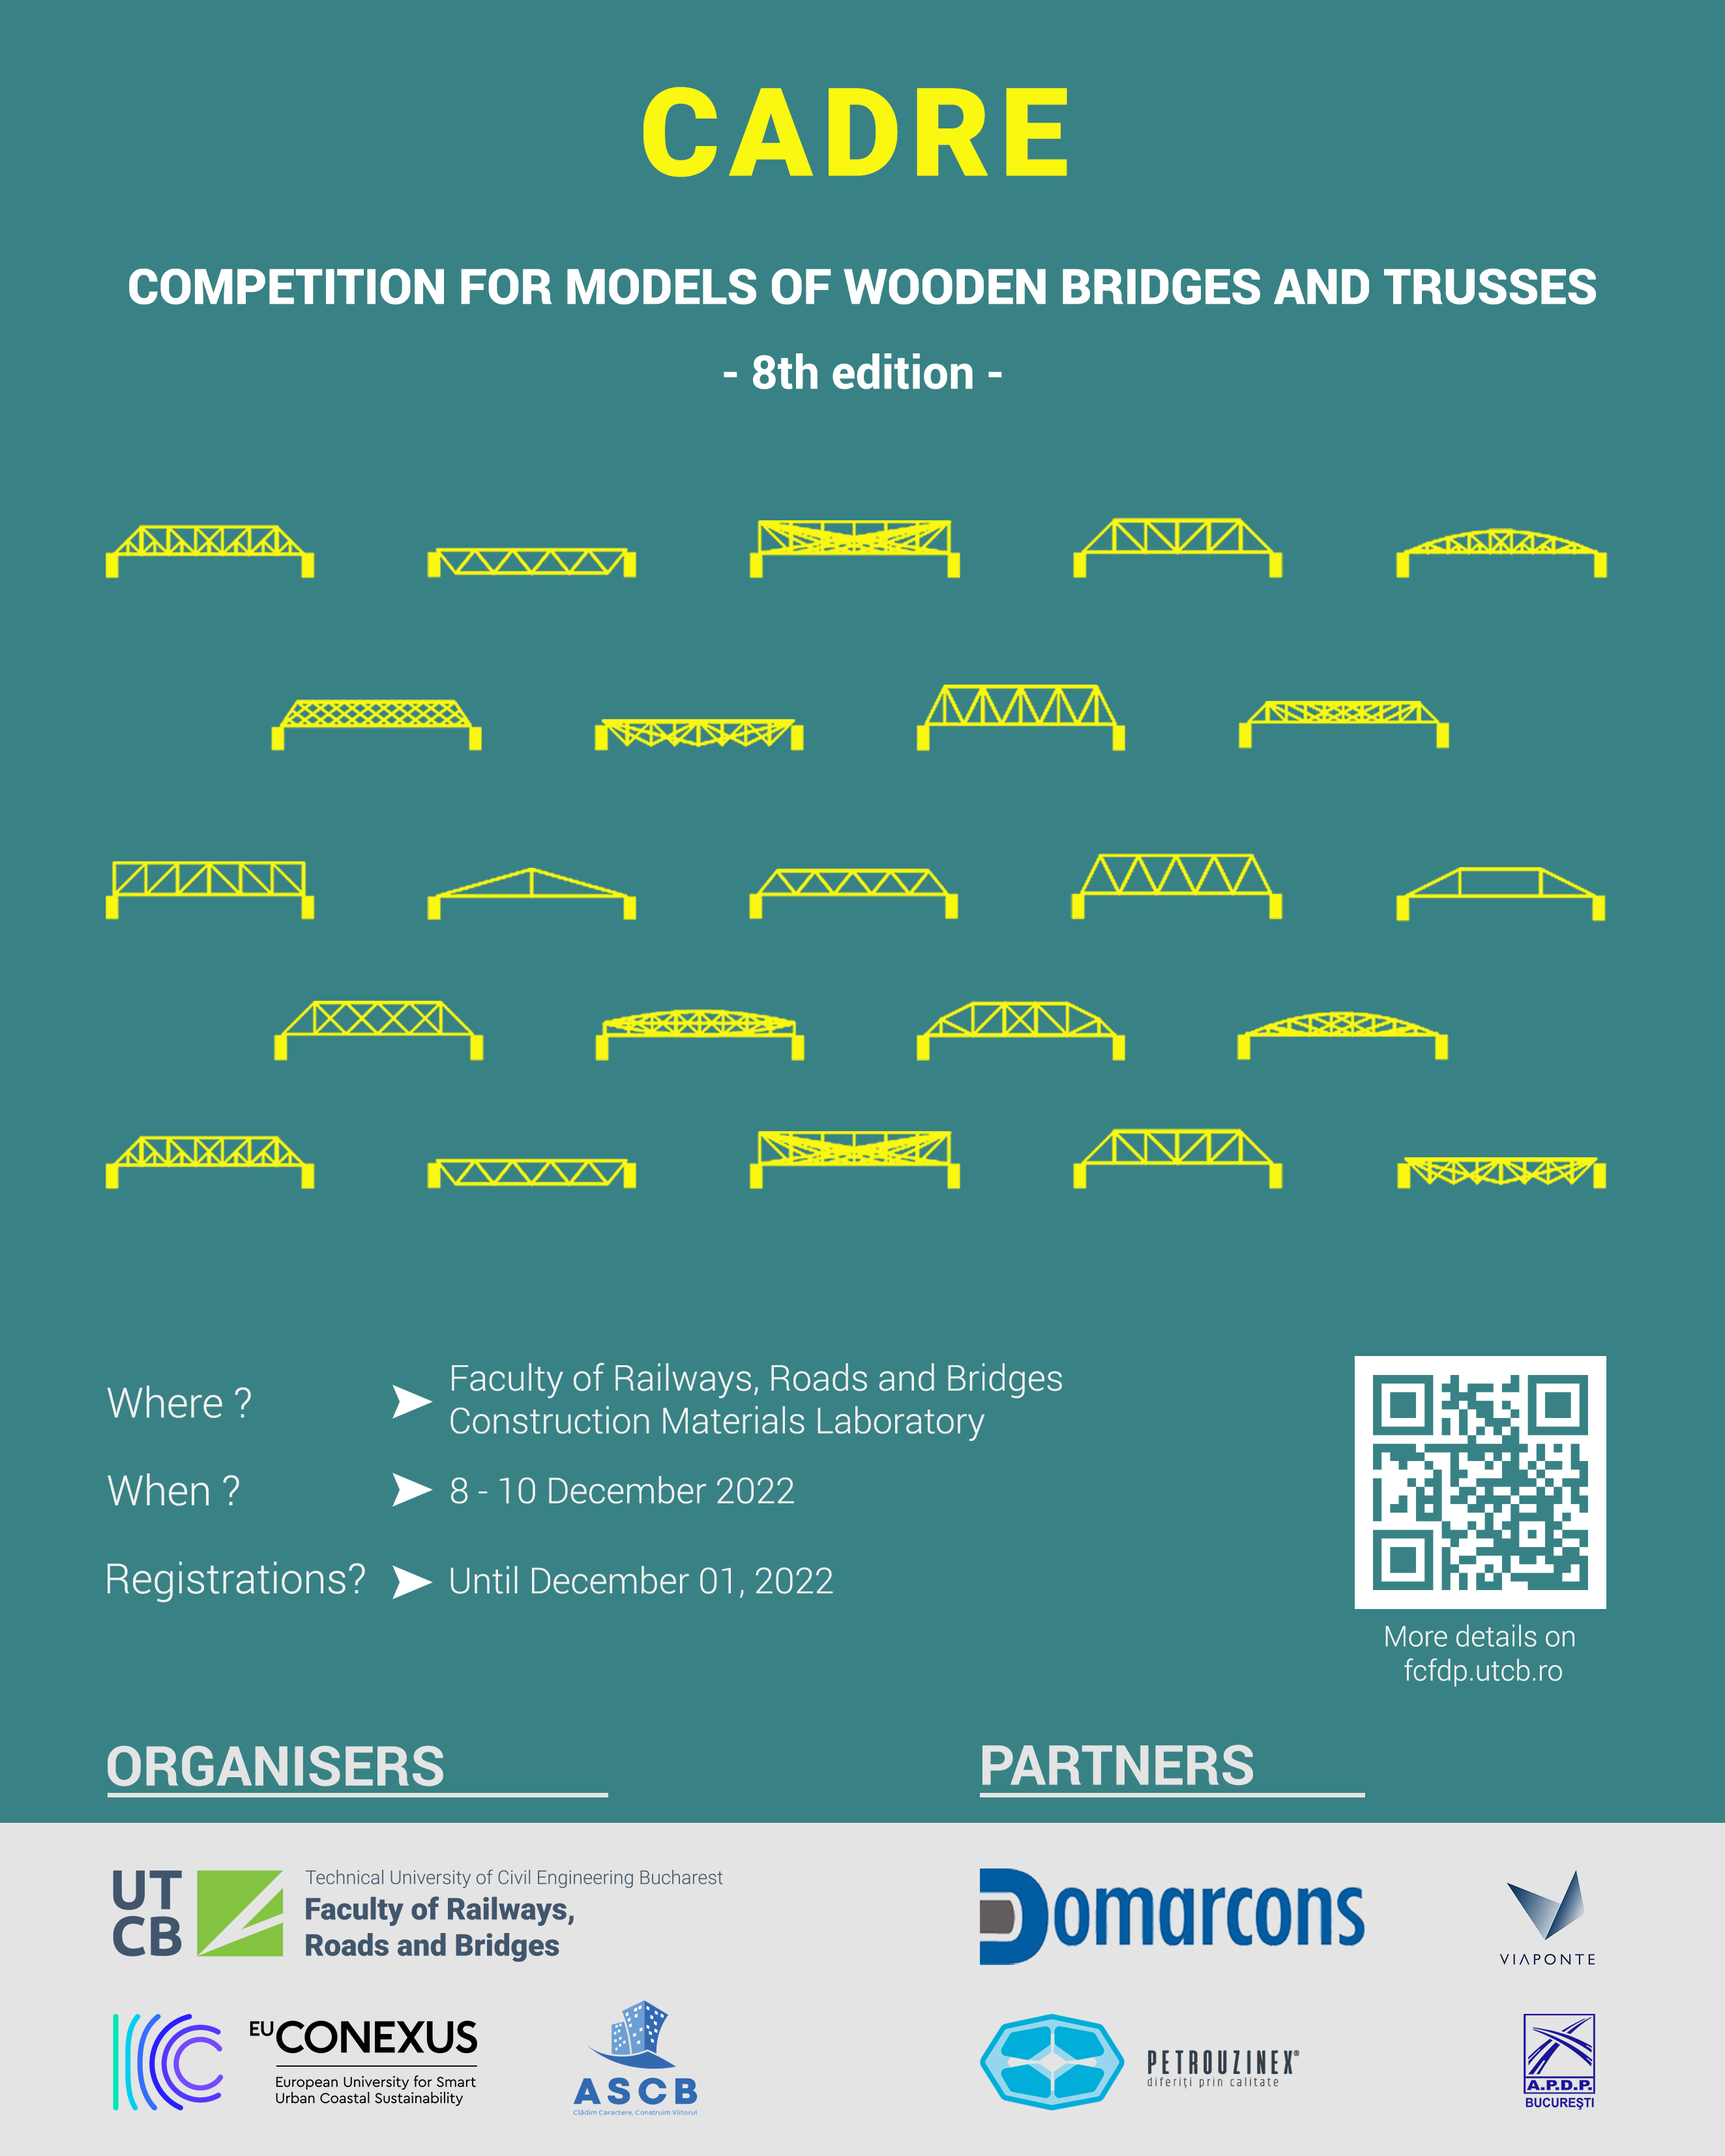 EU-CONEXUS students invited to participate at the 8th edition of C A D R E, WOODEN BRIDGE AND TRUSS MODELS Competition